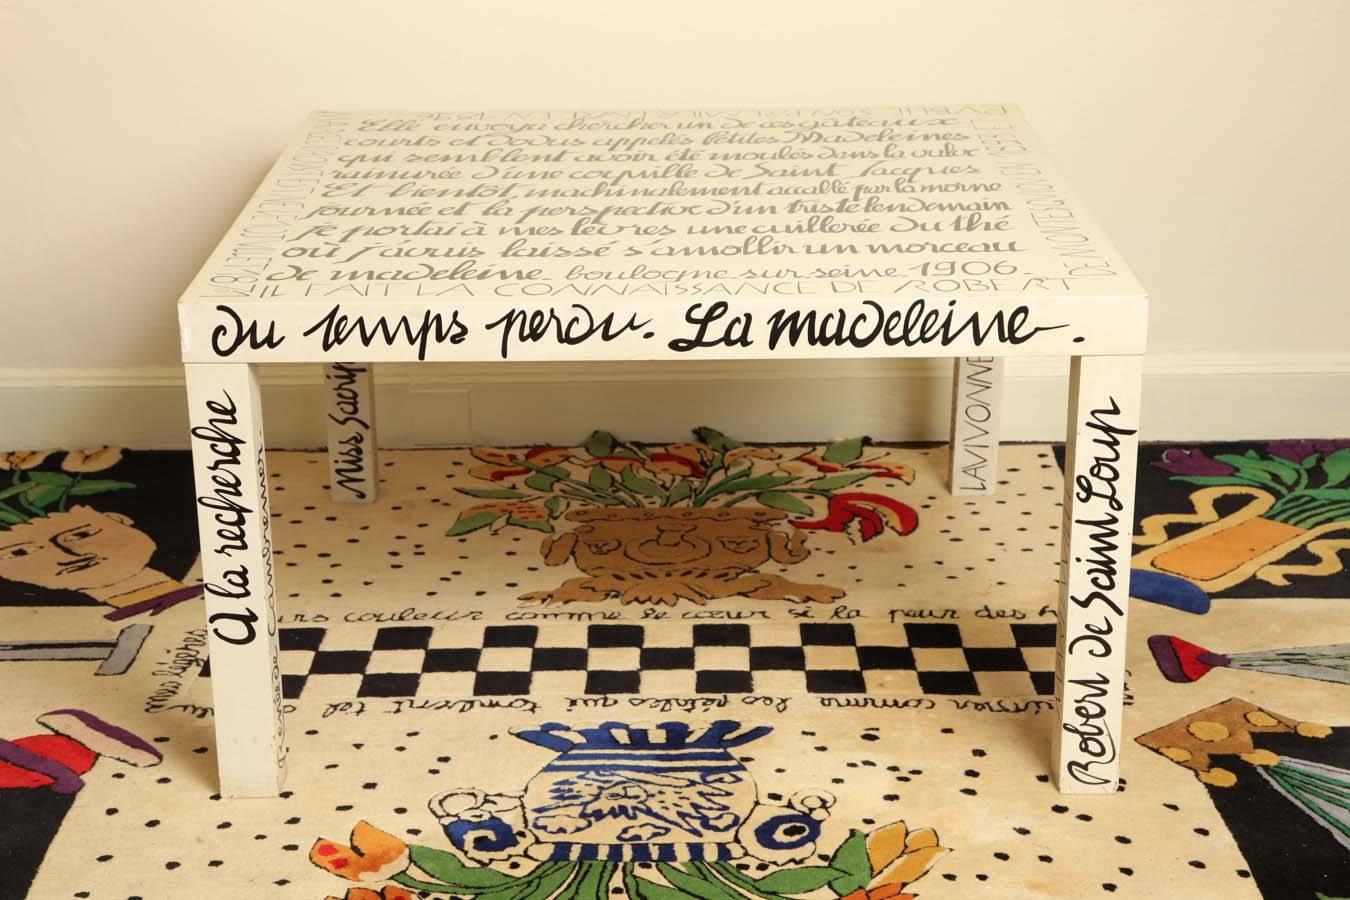 Designed in 1981, this is an important piece in the career of artist and fashion designer Jean-Charles de Castelbajac (Morocco, 1949). Castelbajac first used literary text as ornament in the 1970s. This table is covered in names of characters from